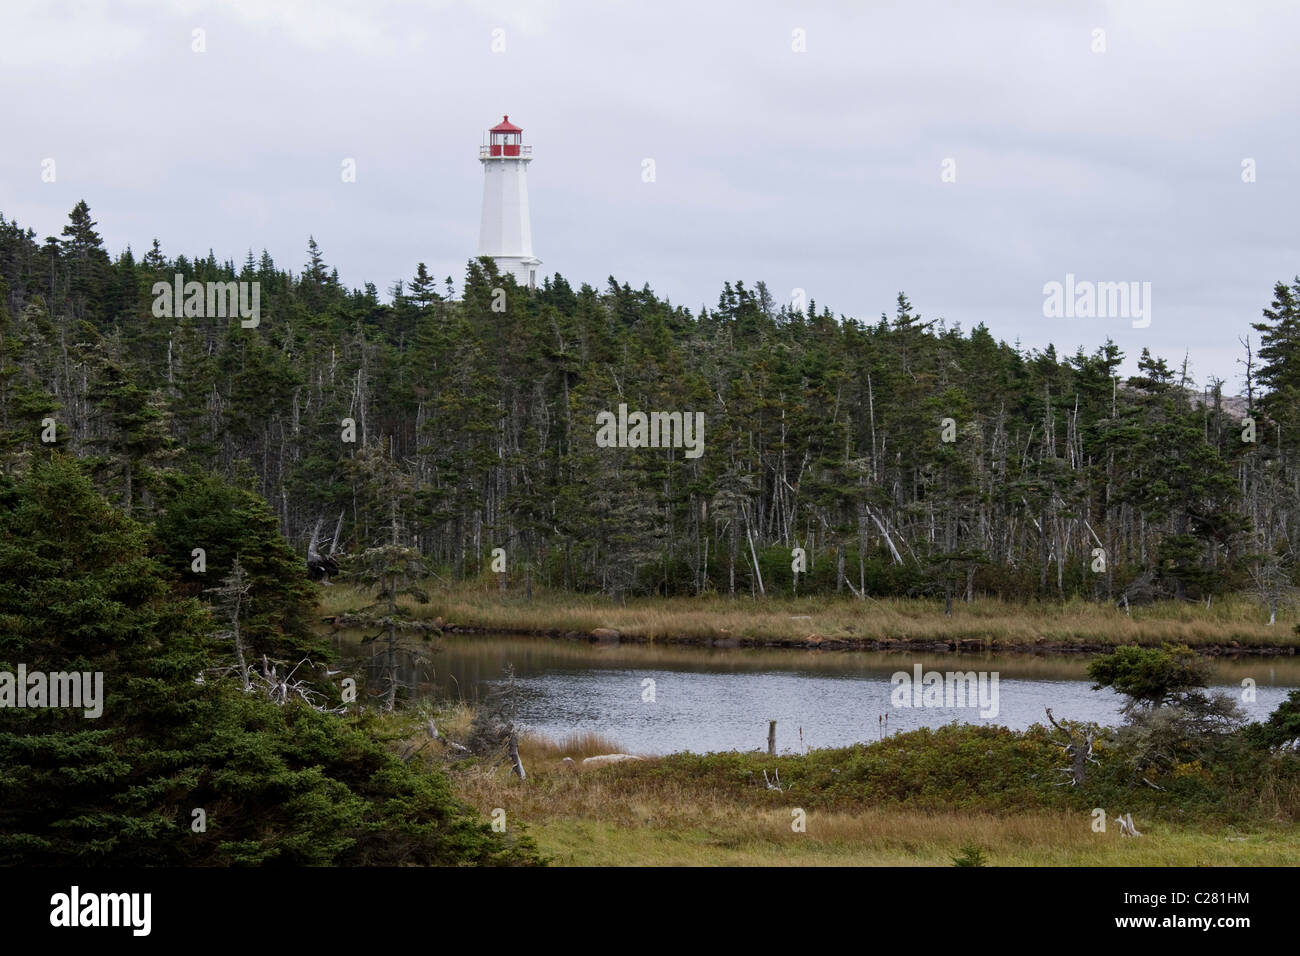 Lighthouse rising from the boreal forest, near Fortress of Louisbourg National Historic Site, Cape Breton, Nova Scotia, Canada Stock Photo